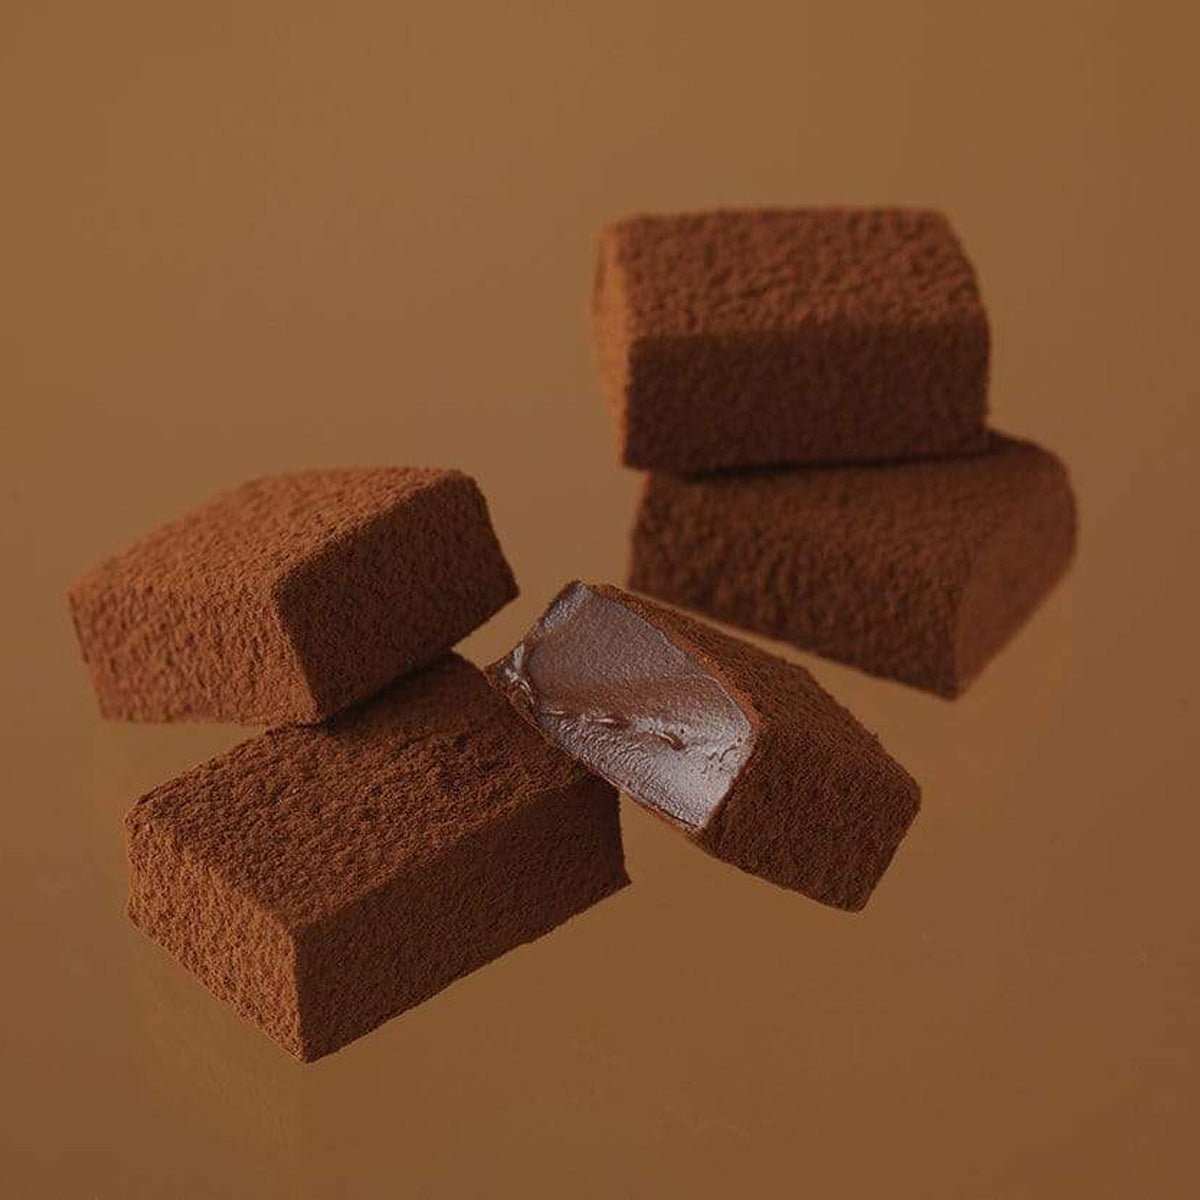 ROYCE' Chocolate - Nama Chocolate "Mild Cacao" - Image shows brown blocks of chocolates with a brown background.